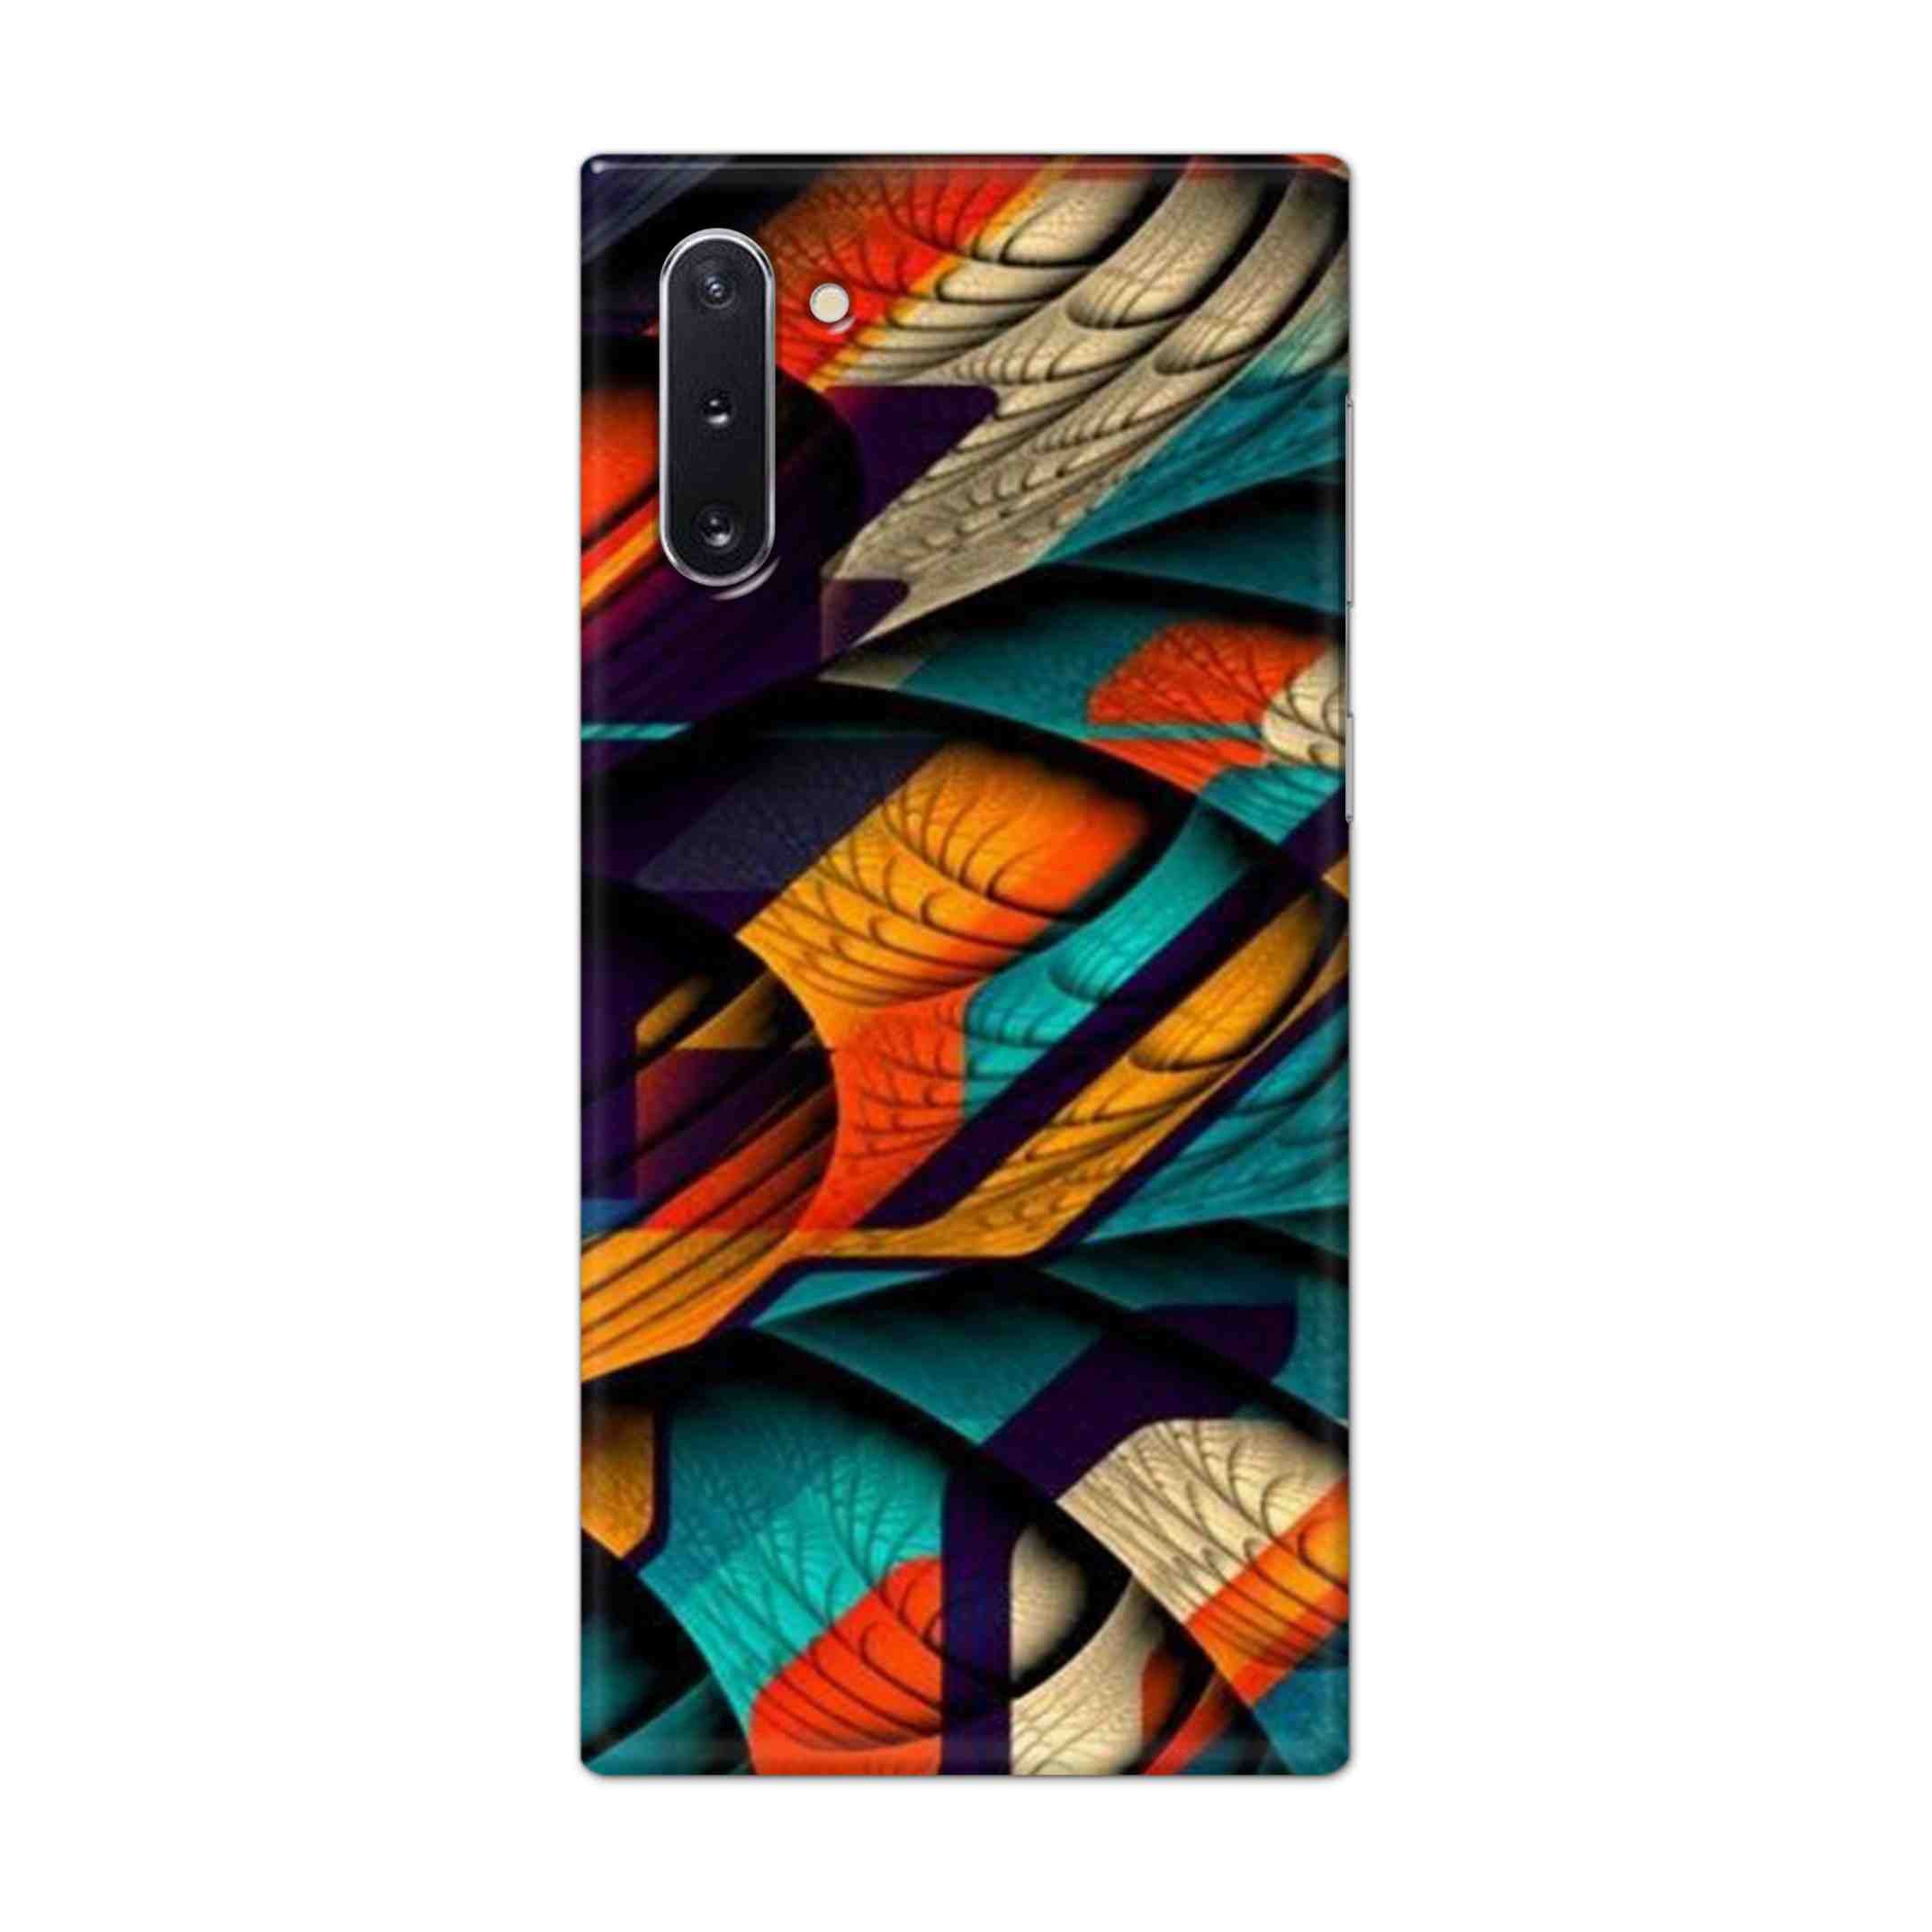 Buy Colour Abstract Hard Back Mobile Phone Case Cover For Samsung Galaxy Note 10 Online